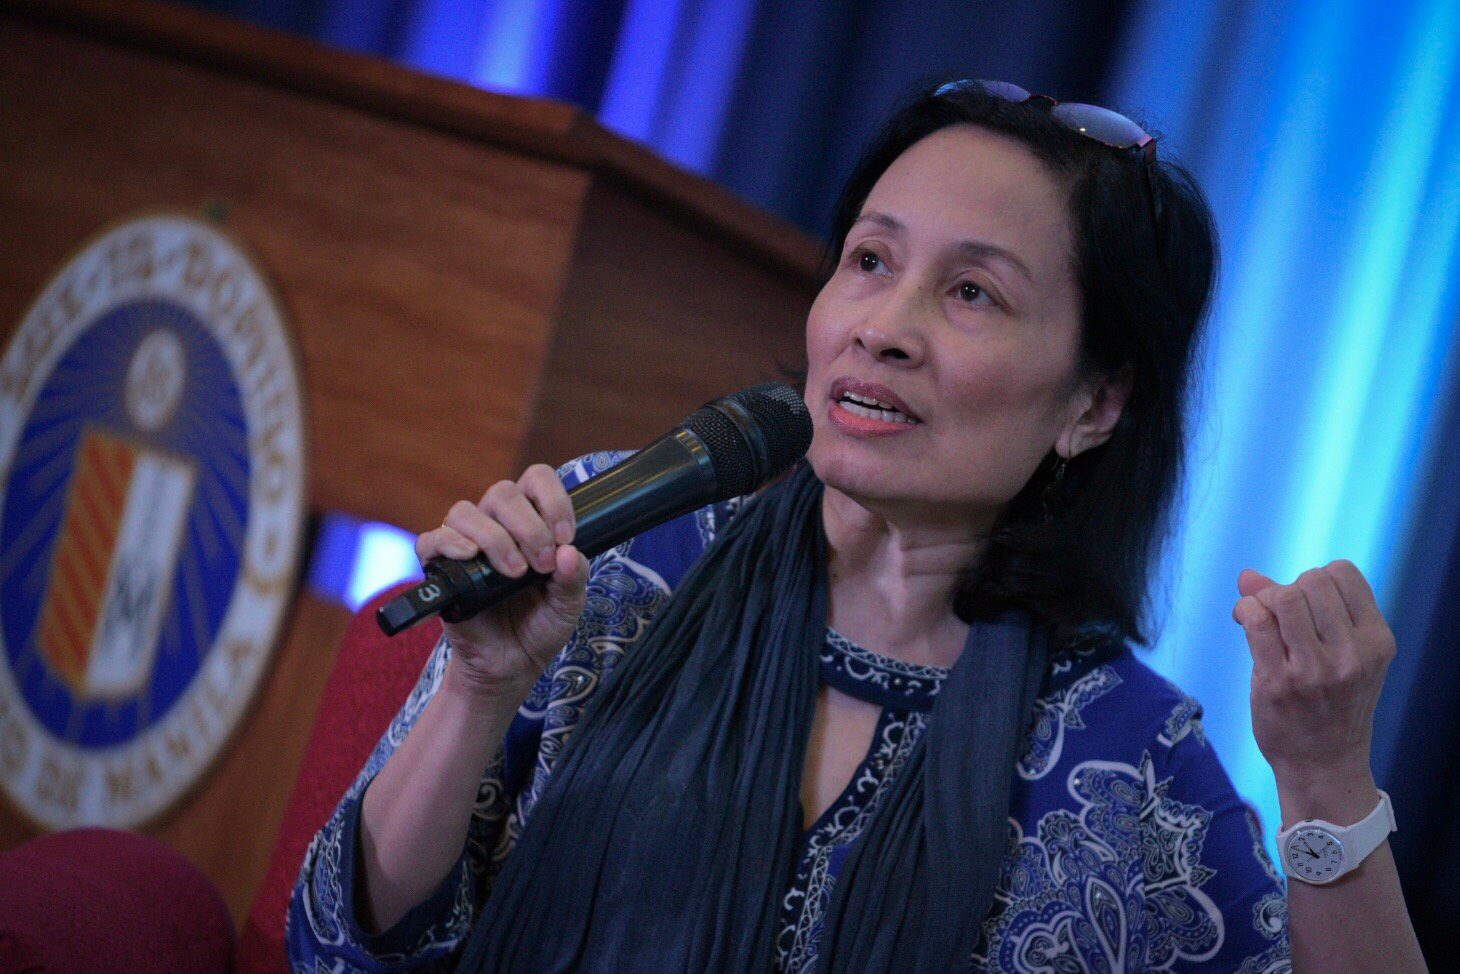 RESPONSIBLE BLOGGERS. Jane Uymatiao of Blogwatch during the Democracy and Disinformation forum at Ateneo de Manila Makati campus on February 13, 2018. Photo by LeAnne Jazul/Rappler 